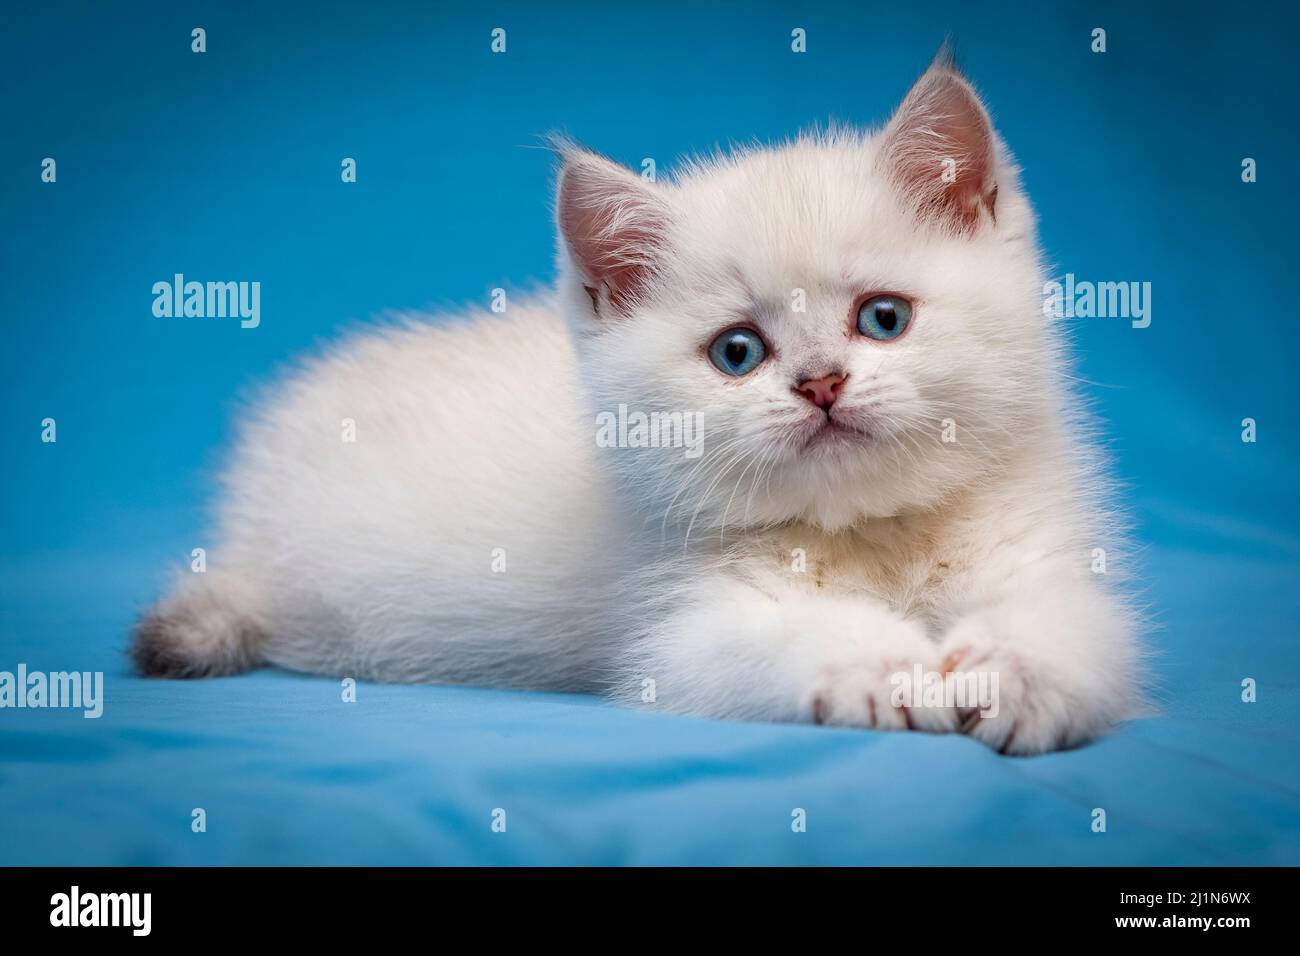 A small white kitten with blue eyes lies on a blue background and looks at the camera. Stock Photo